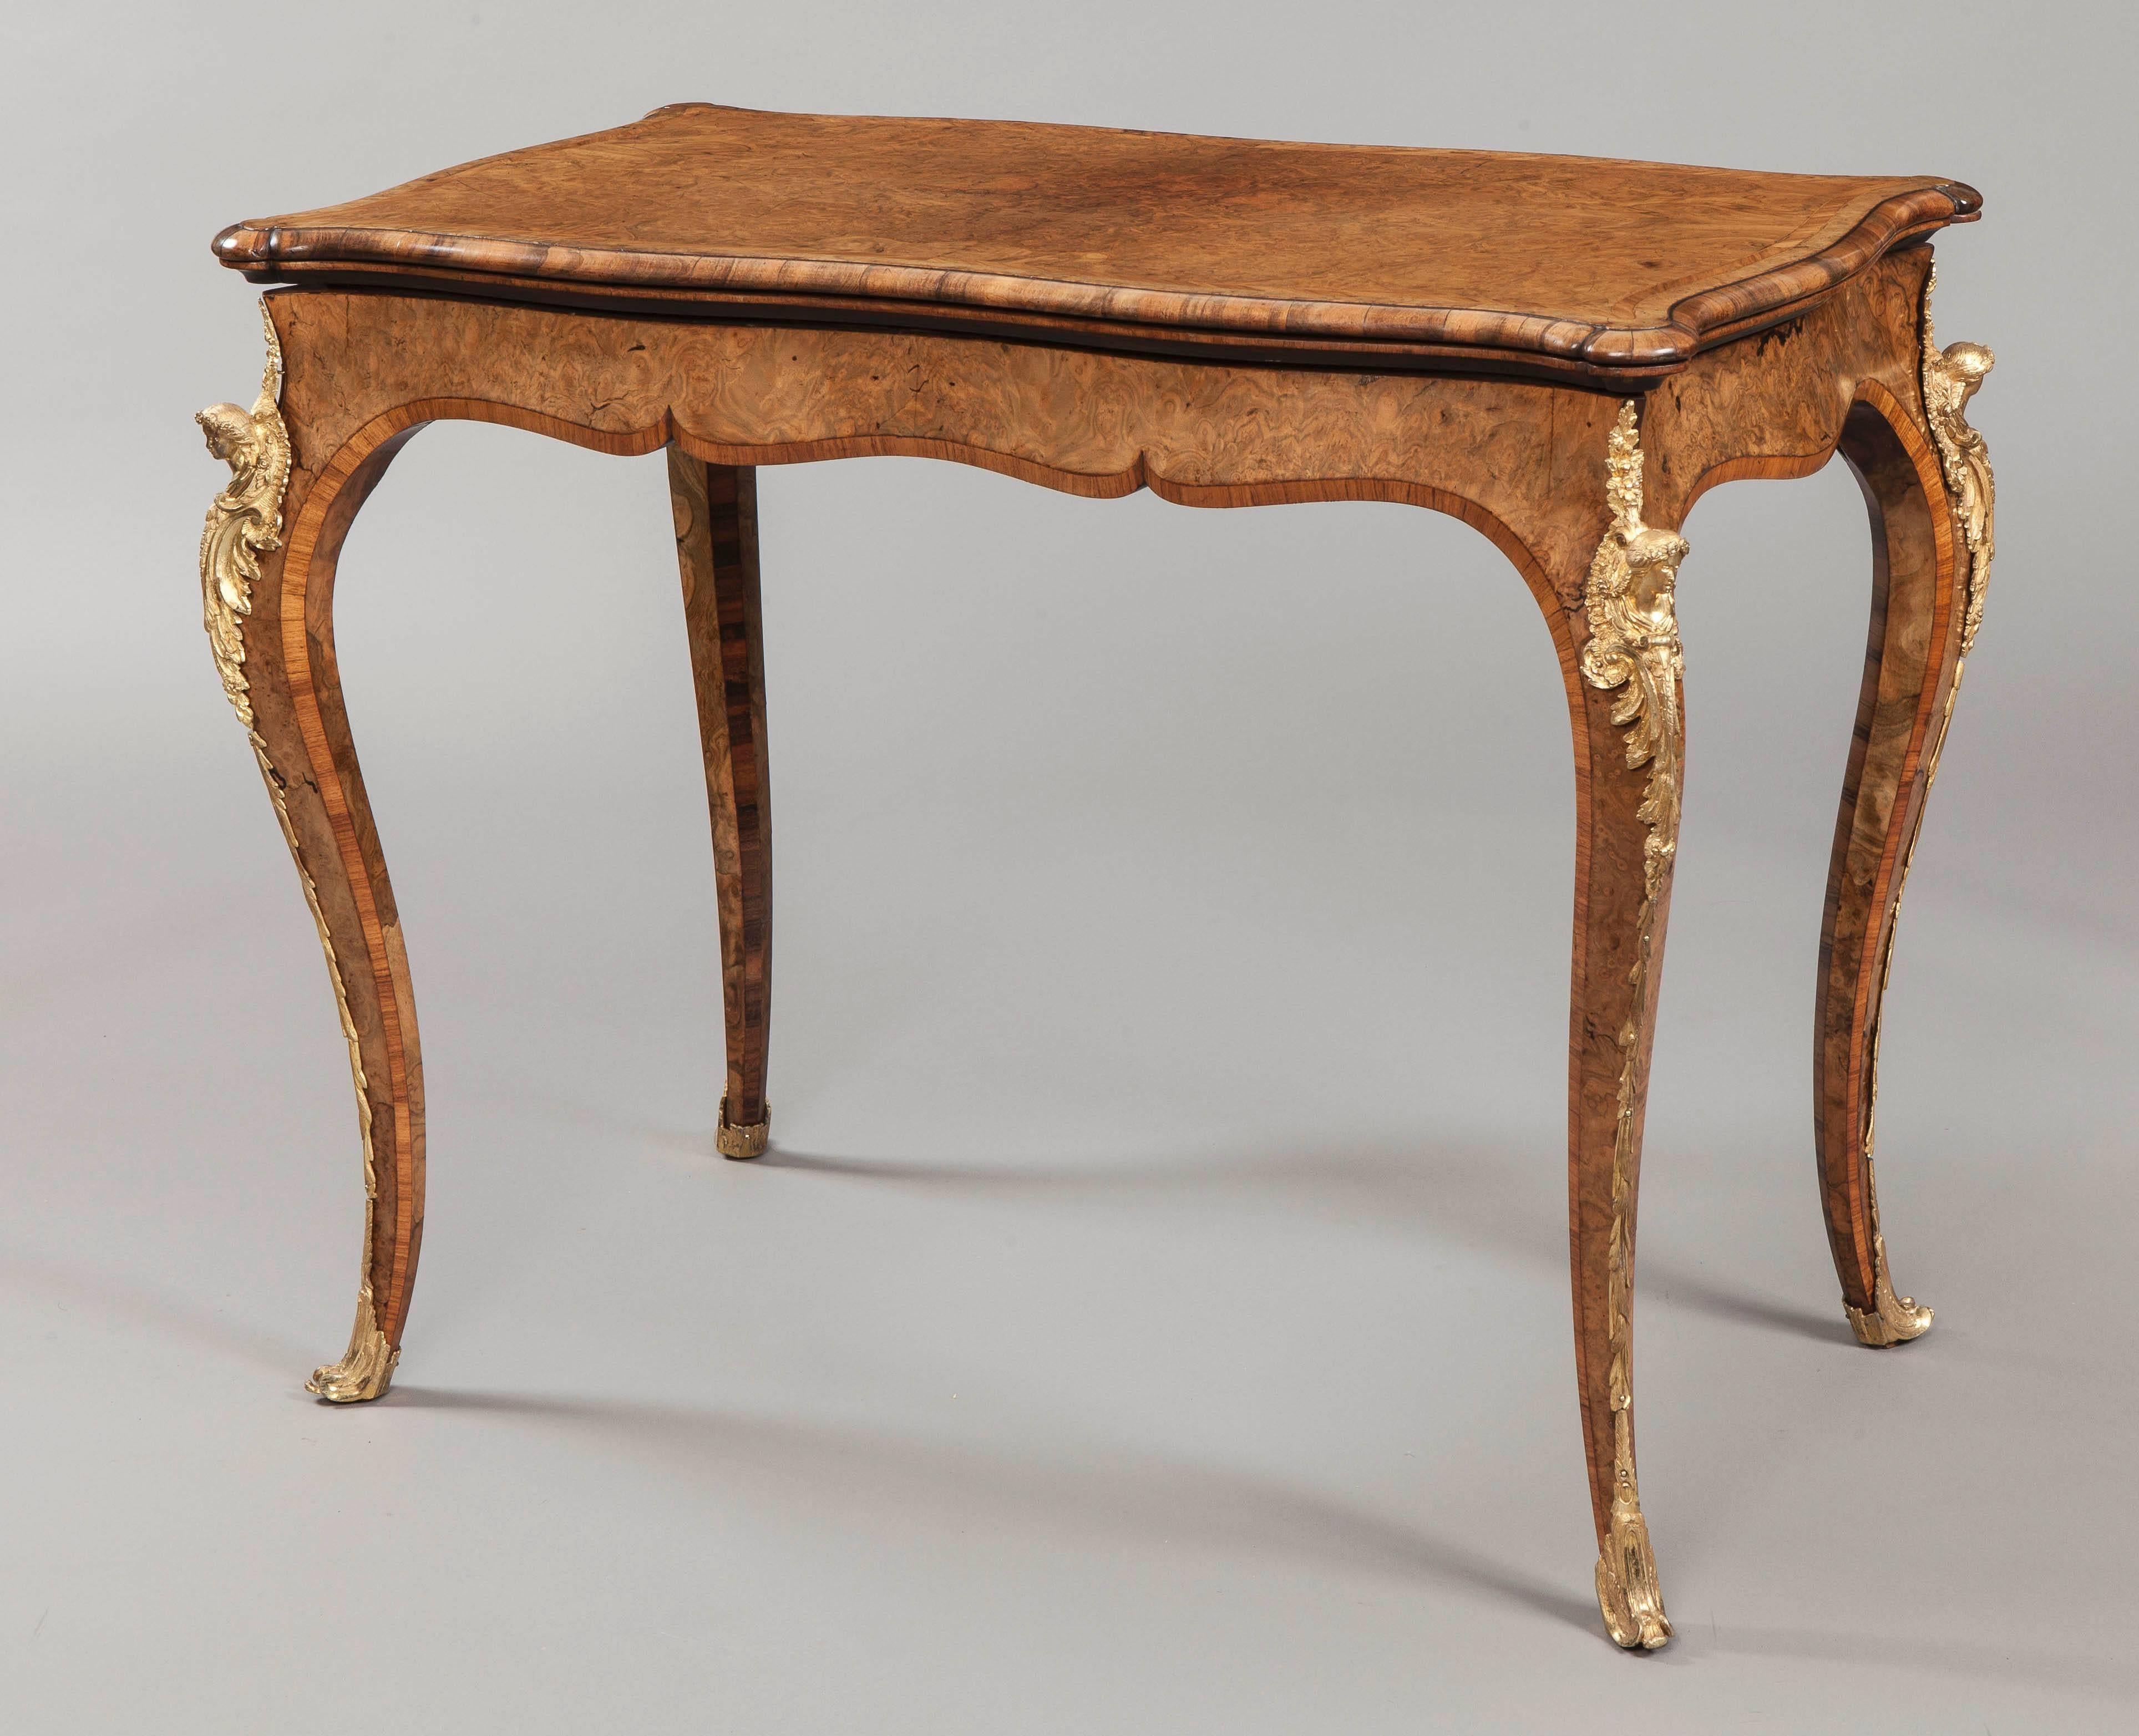 A near pair of card tables firmly attributed to Gillows of Lancaster.

Designed in the Louis XV manner, and constructed using a finely grained Circassian burr walnut, with kingwood crossbanding and boxwood stringing, with gilt bronze adornments;